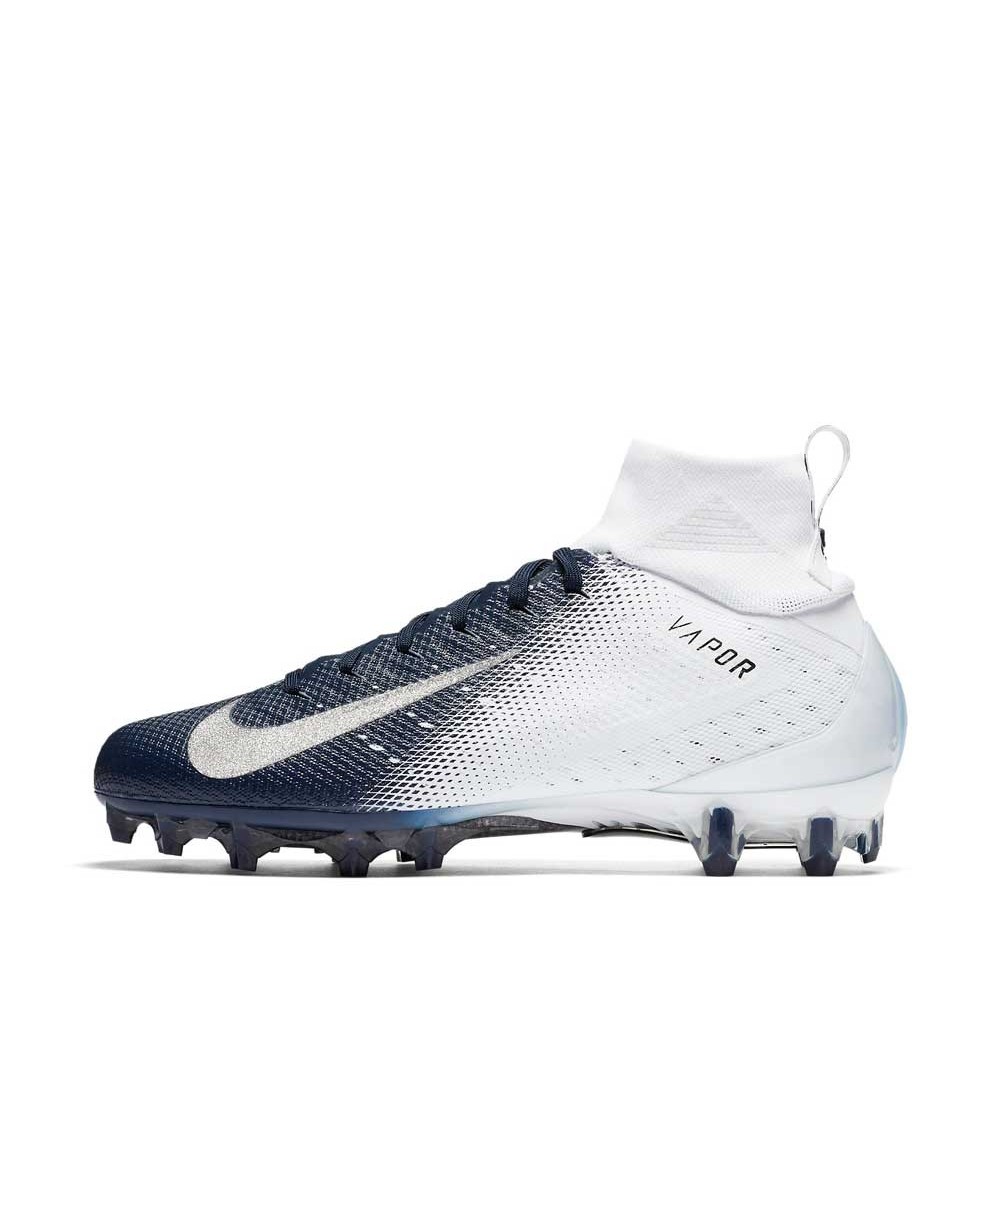 navy blue and white cleats